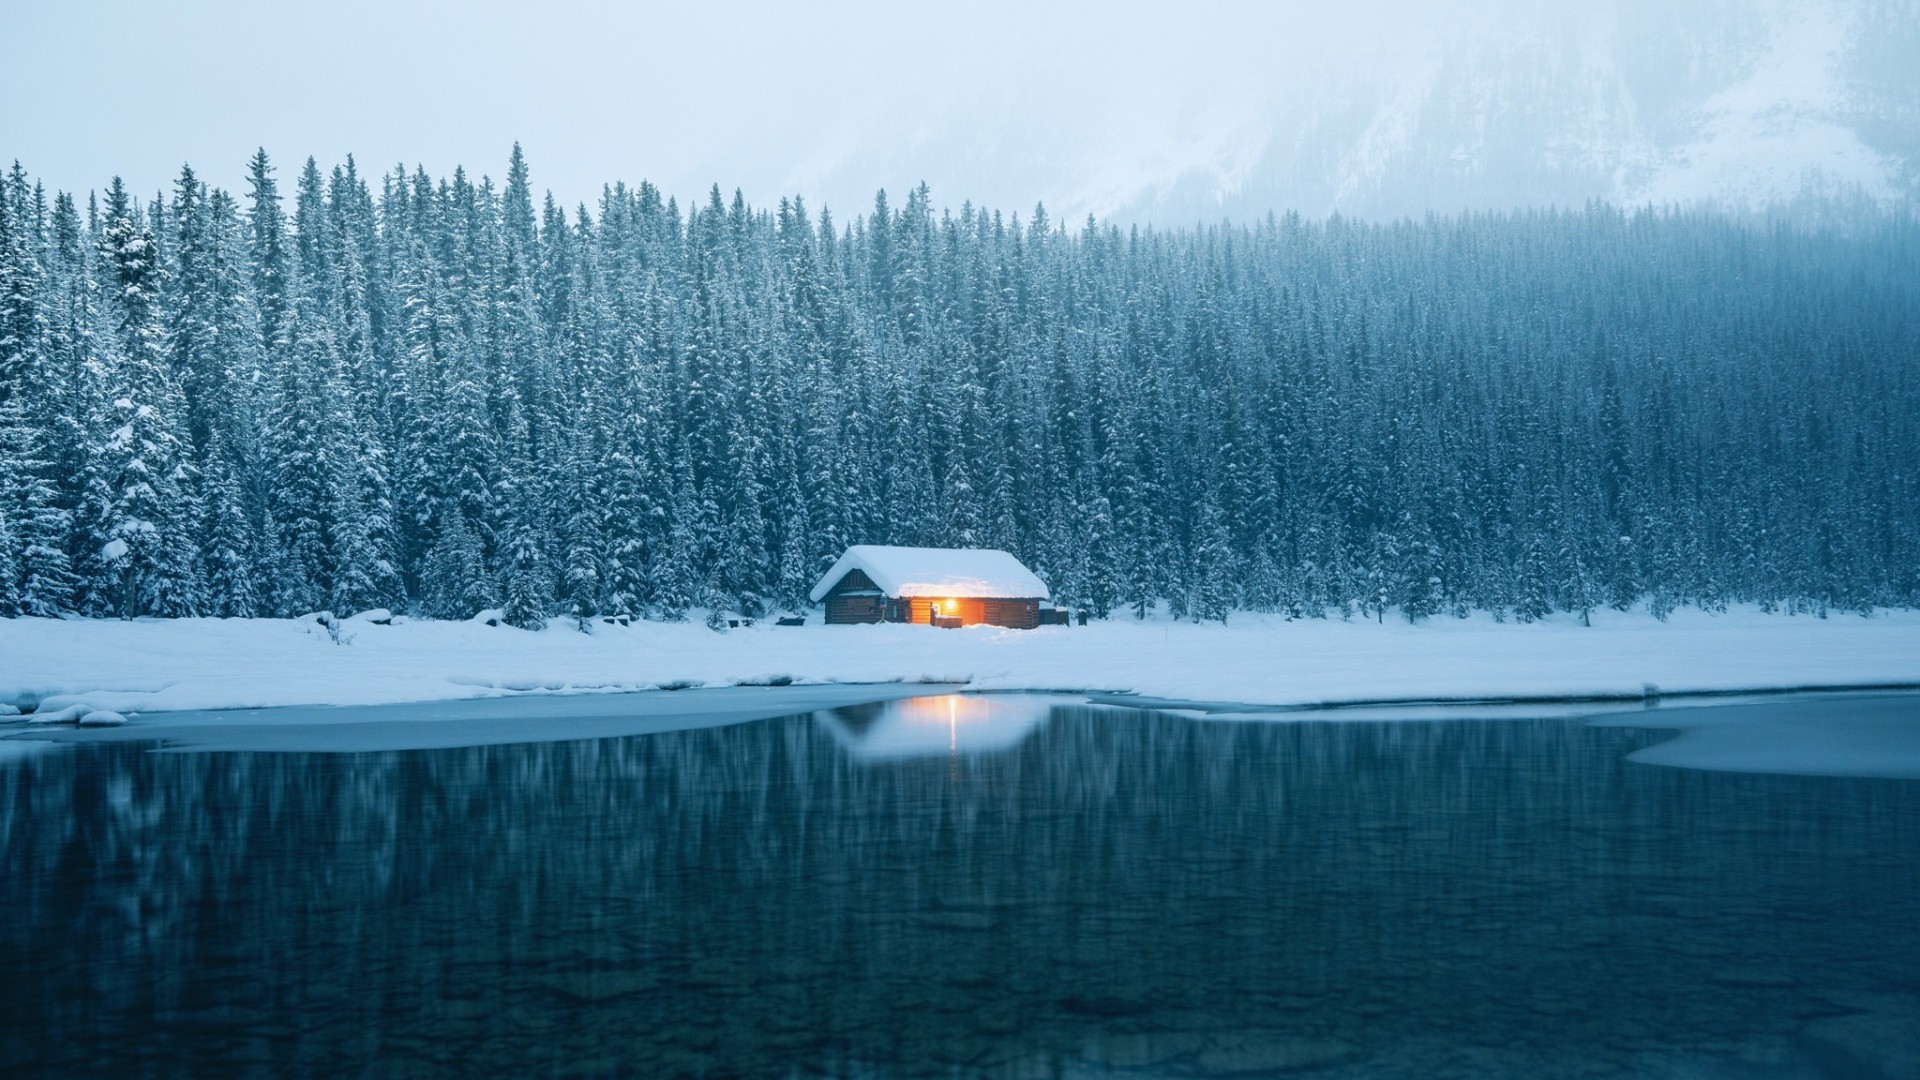 General 1920x1080 winter snow ice lake trees cabin landscape cold outdoors water reflection